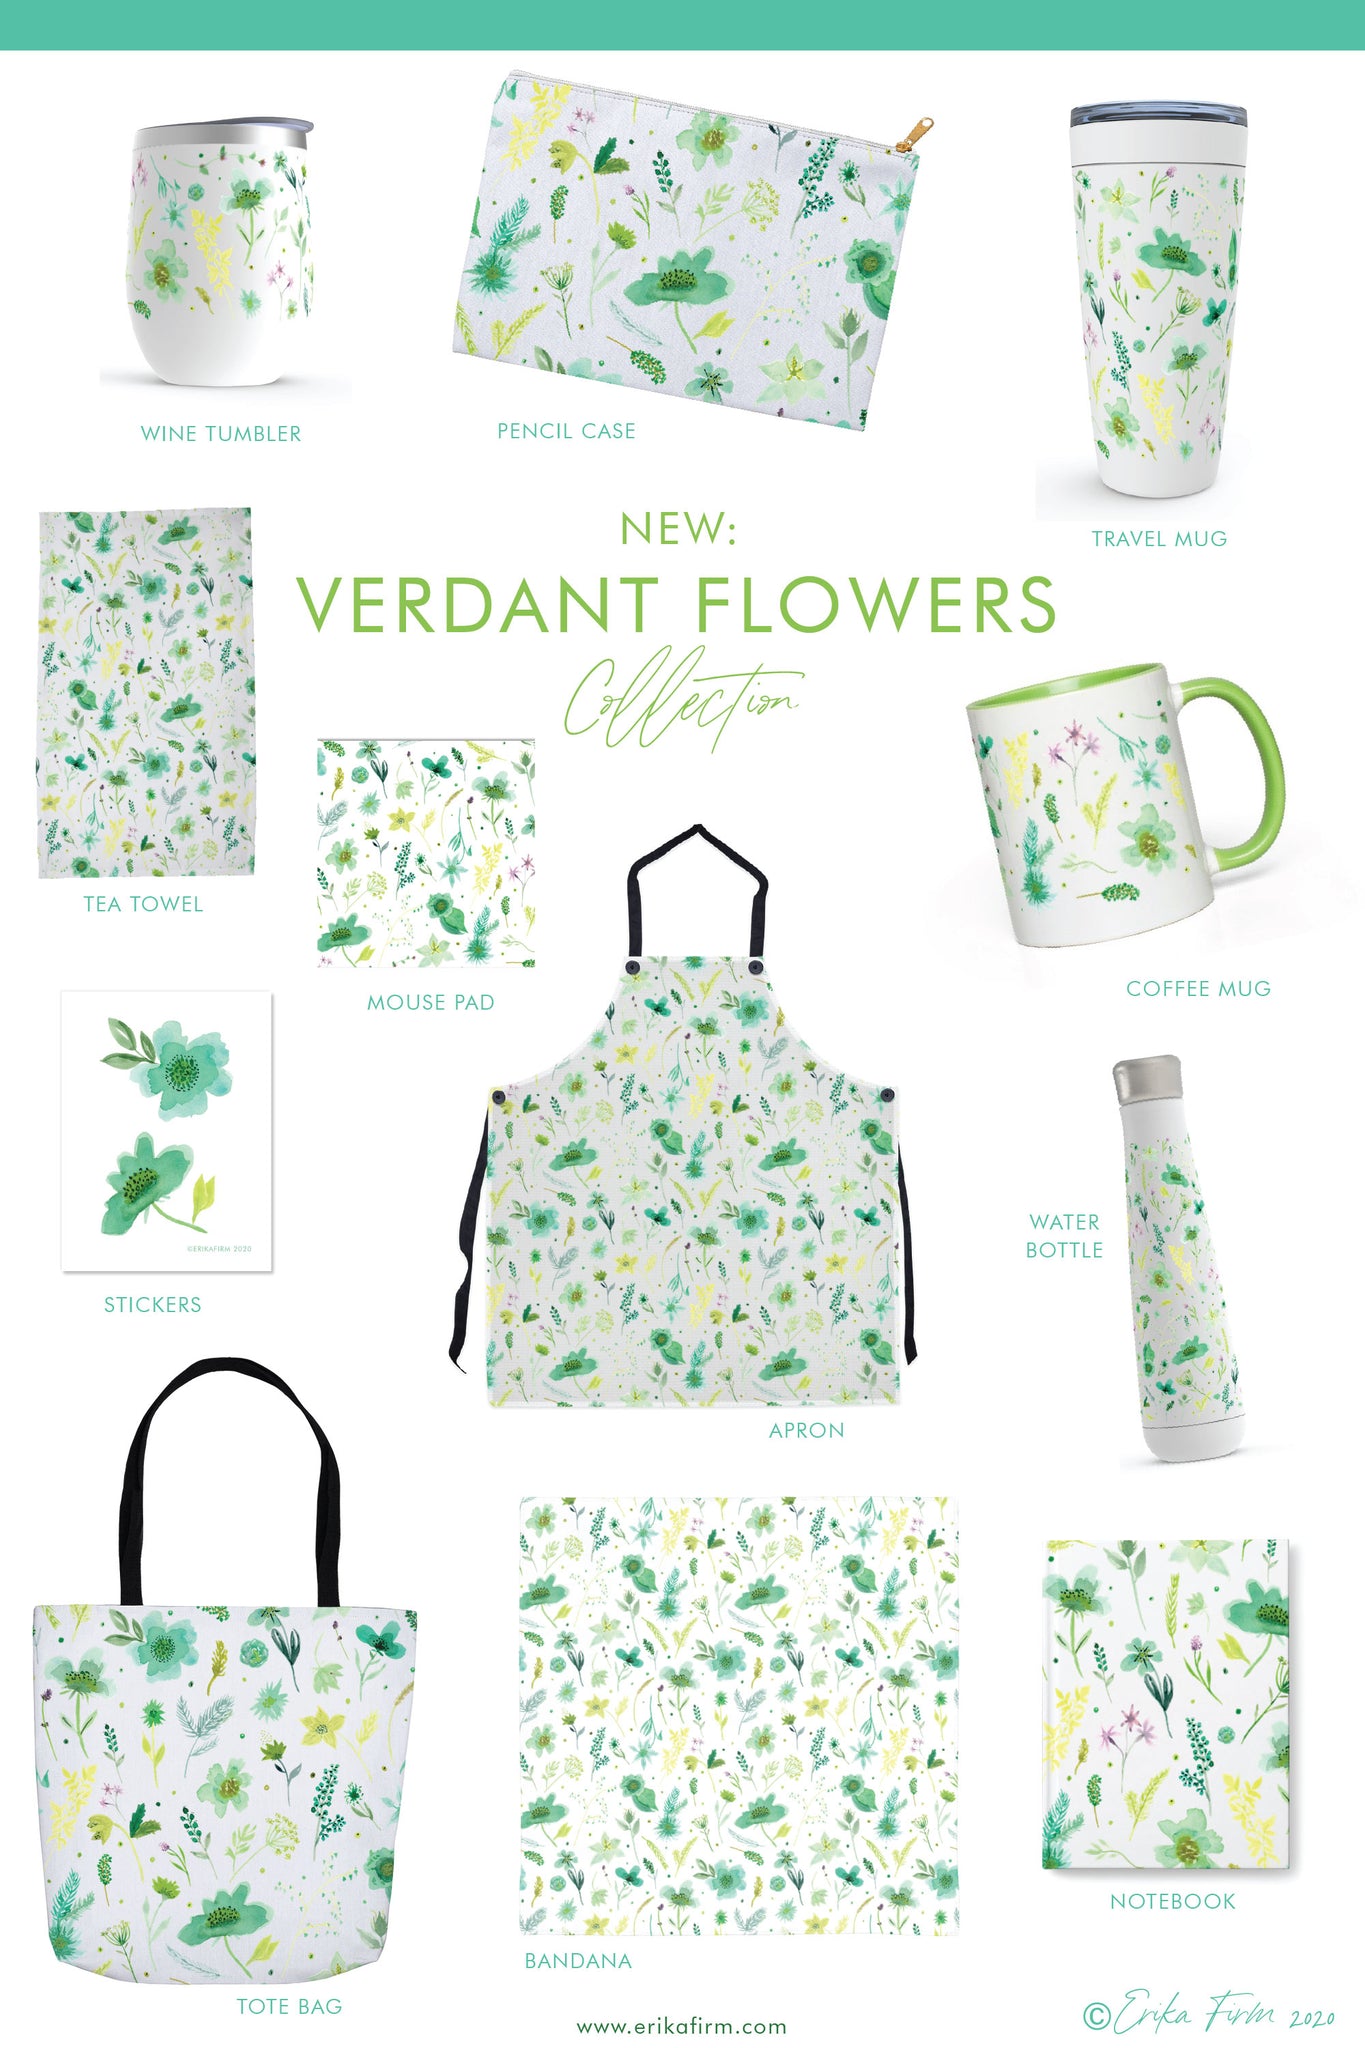 New Verdant Flowers Collection of gifts by Erika Firm featuring floral wine tumblers, drinkware, pencil cases, tea towels, stickers, tote bags, and note books